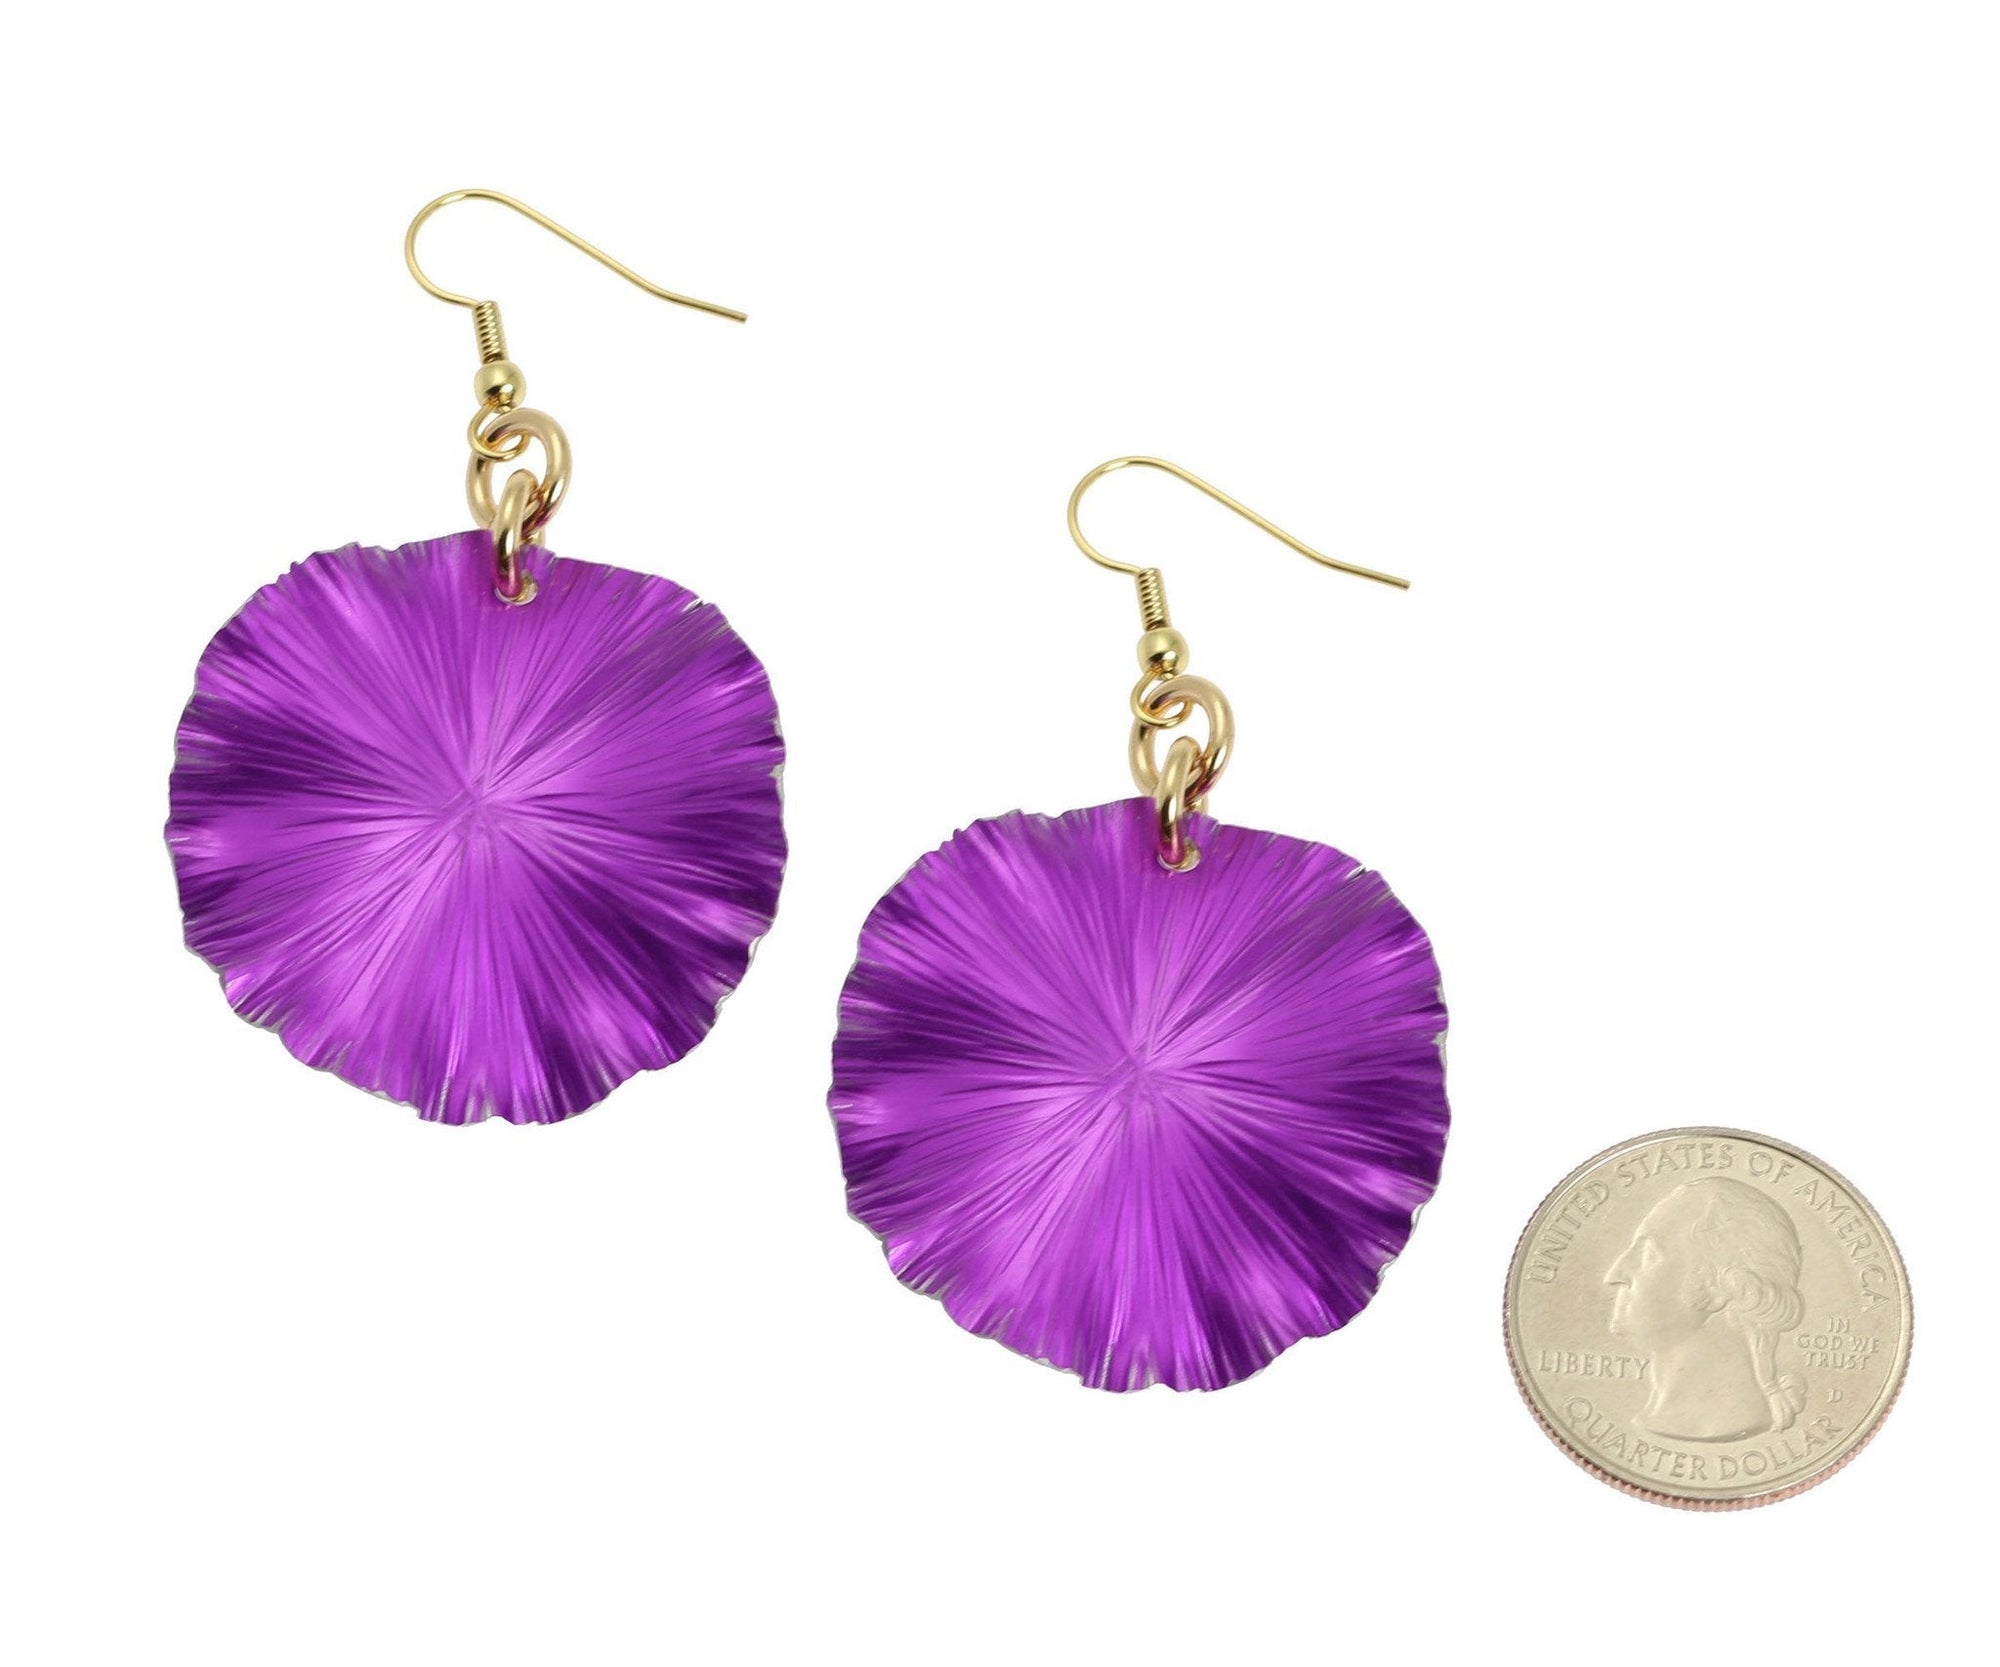 Size of Violet Anodized Aluminum Lily Pad Earrings